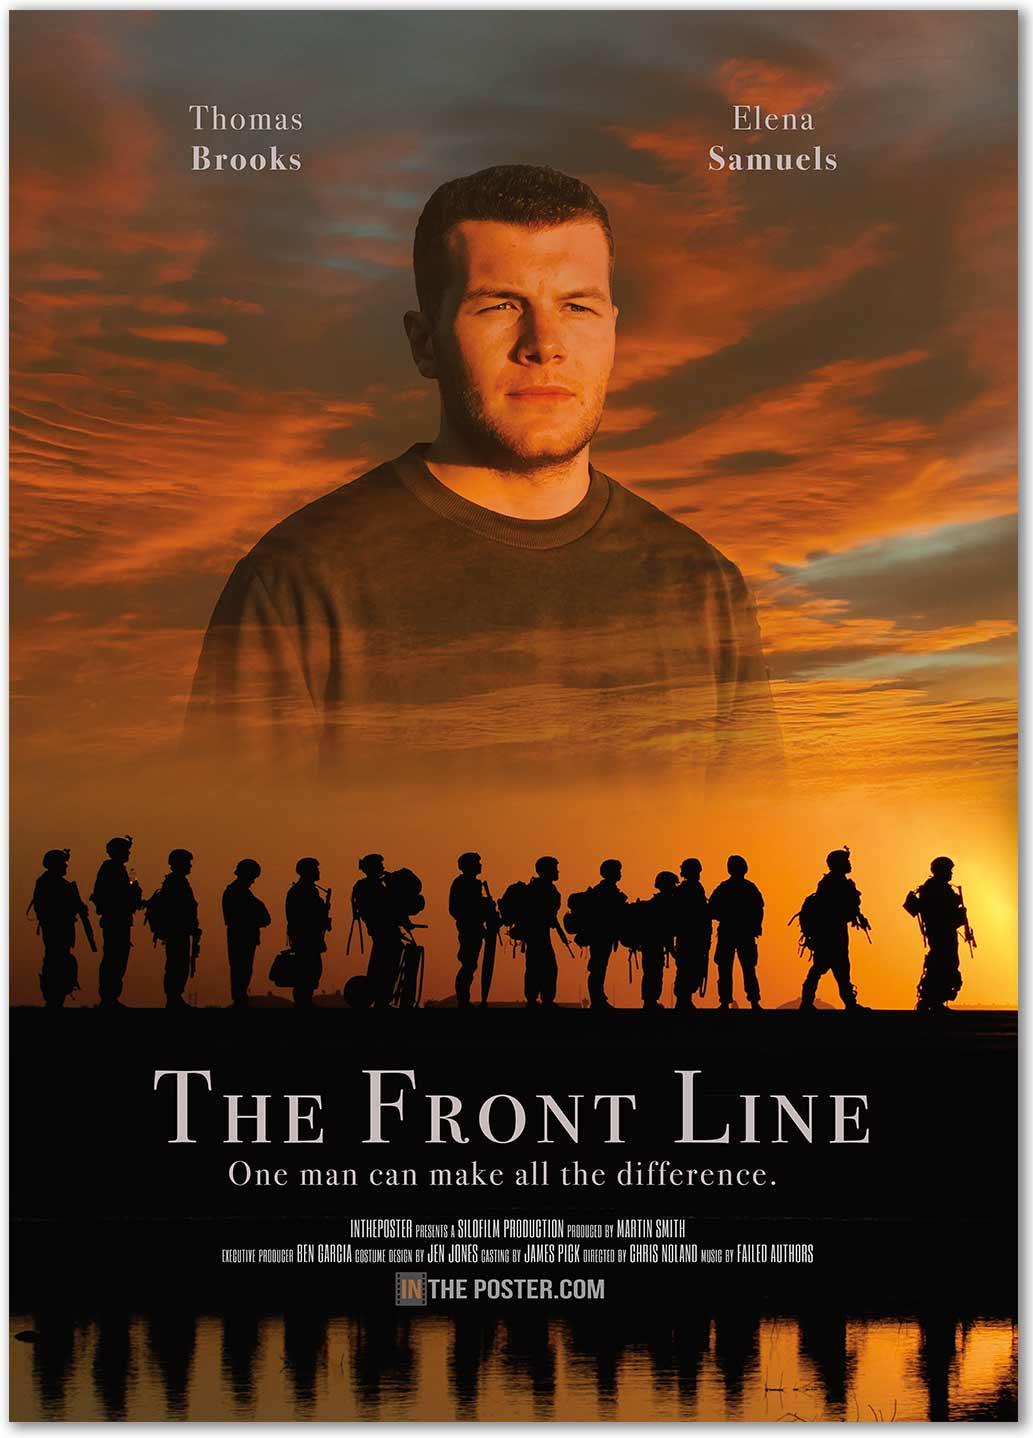 The Front Line - Personalized Movie Poster Design - In The Poster